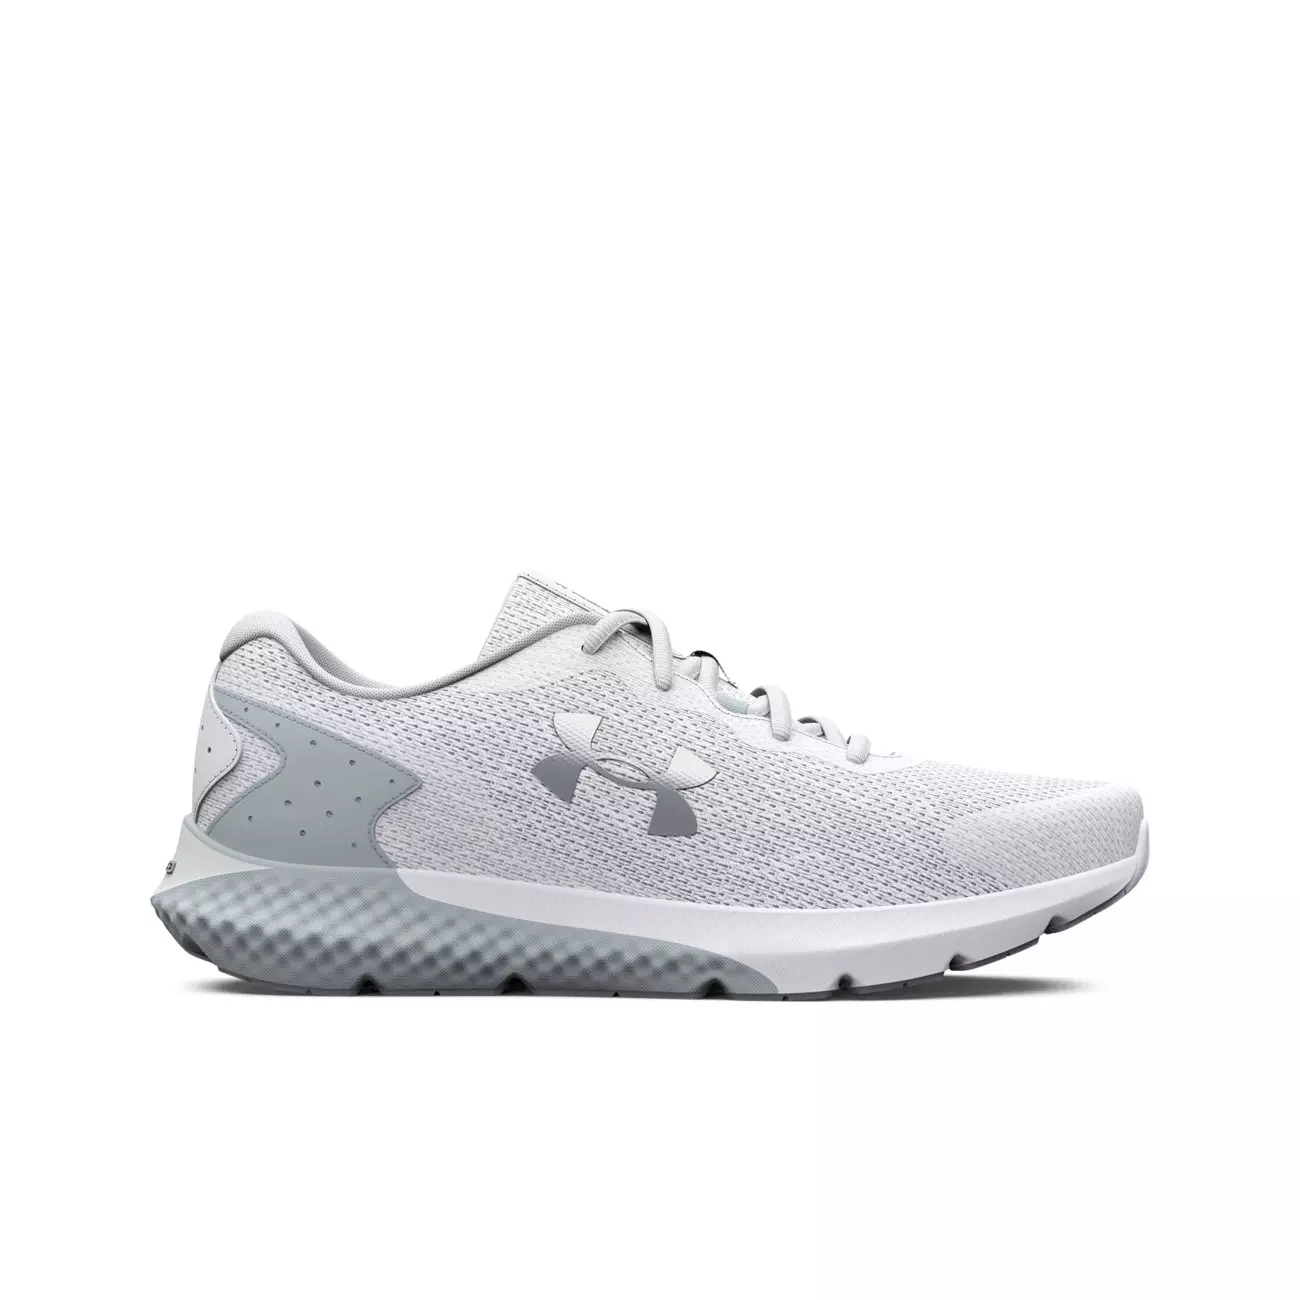 Under armour Charged Rogue 3 Knit Running Shoes Grey